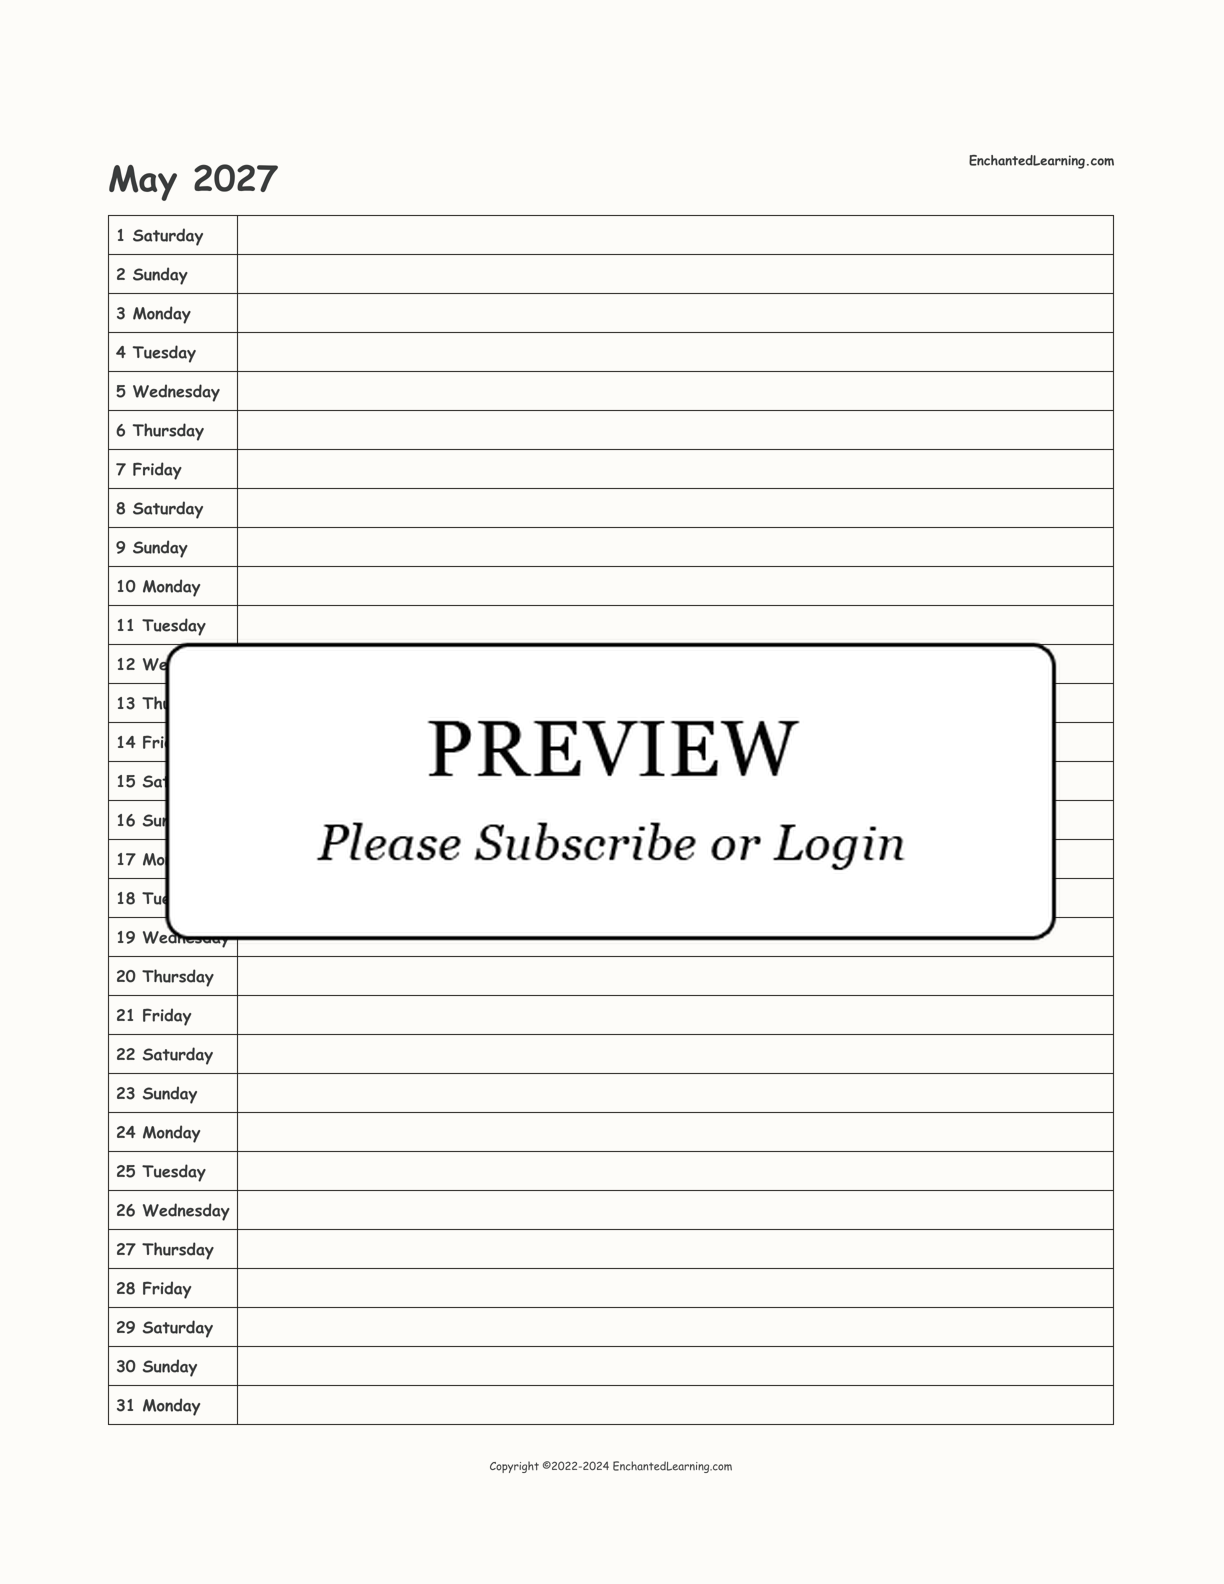 2027 Scheduling Calendar interactive printout page 5